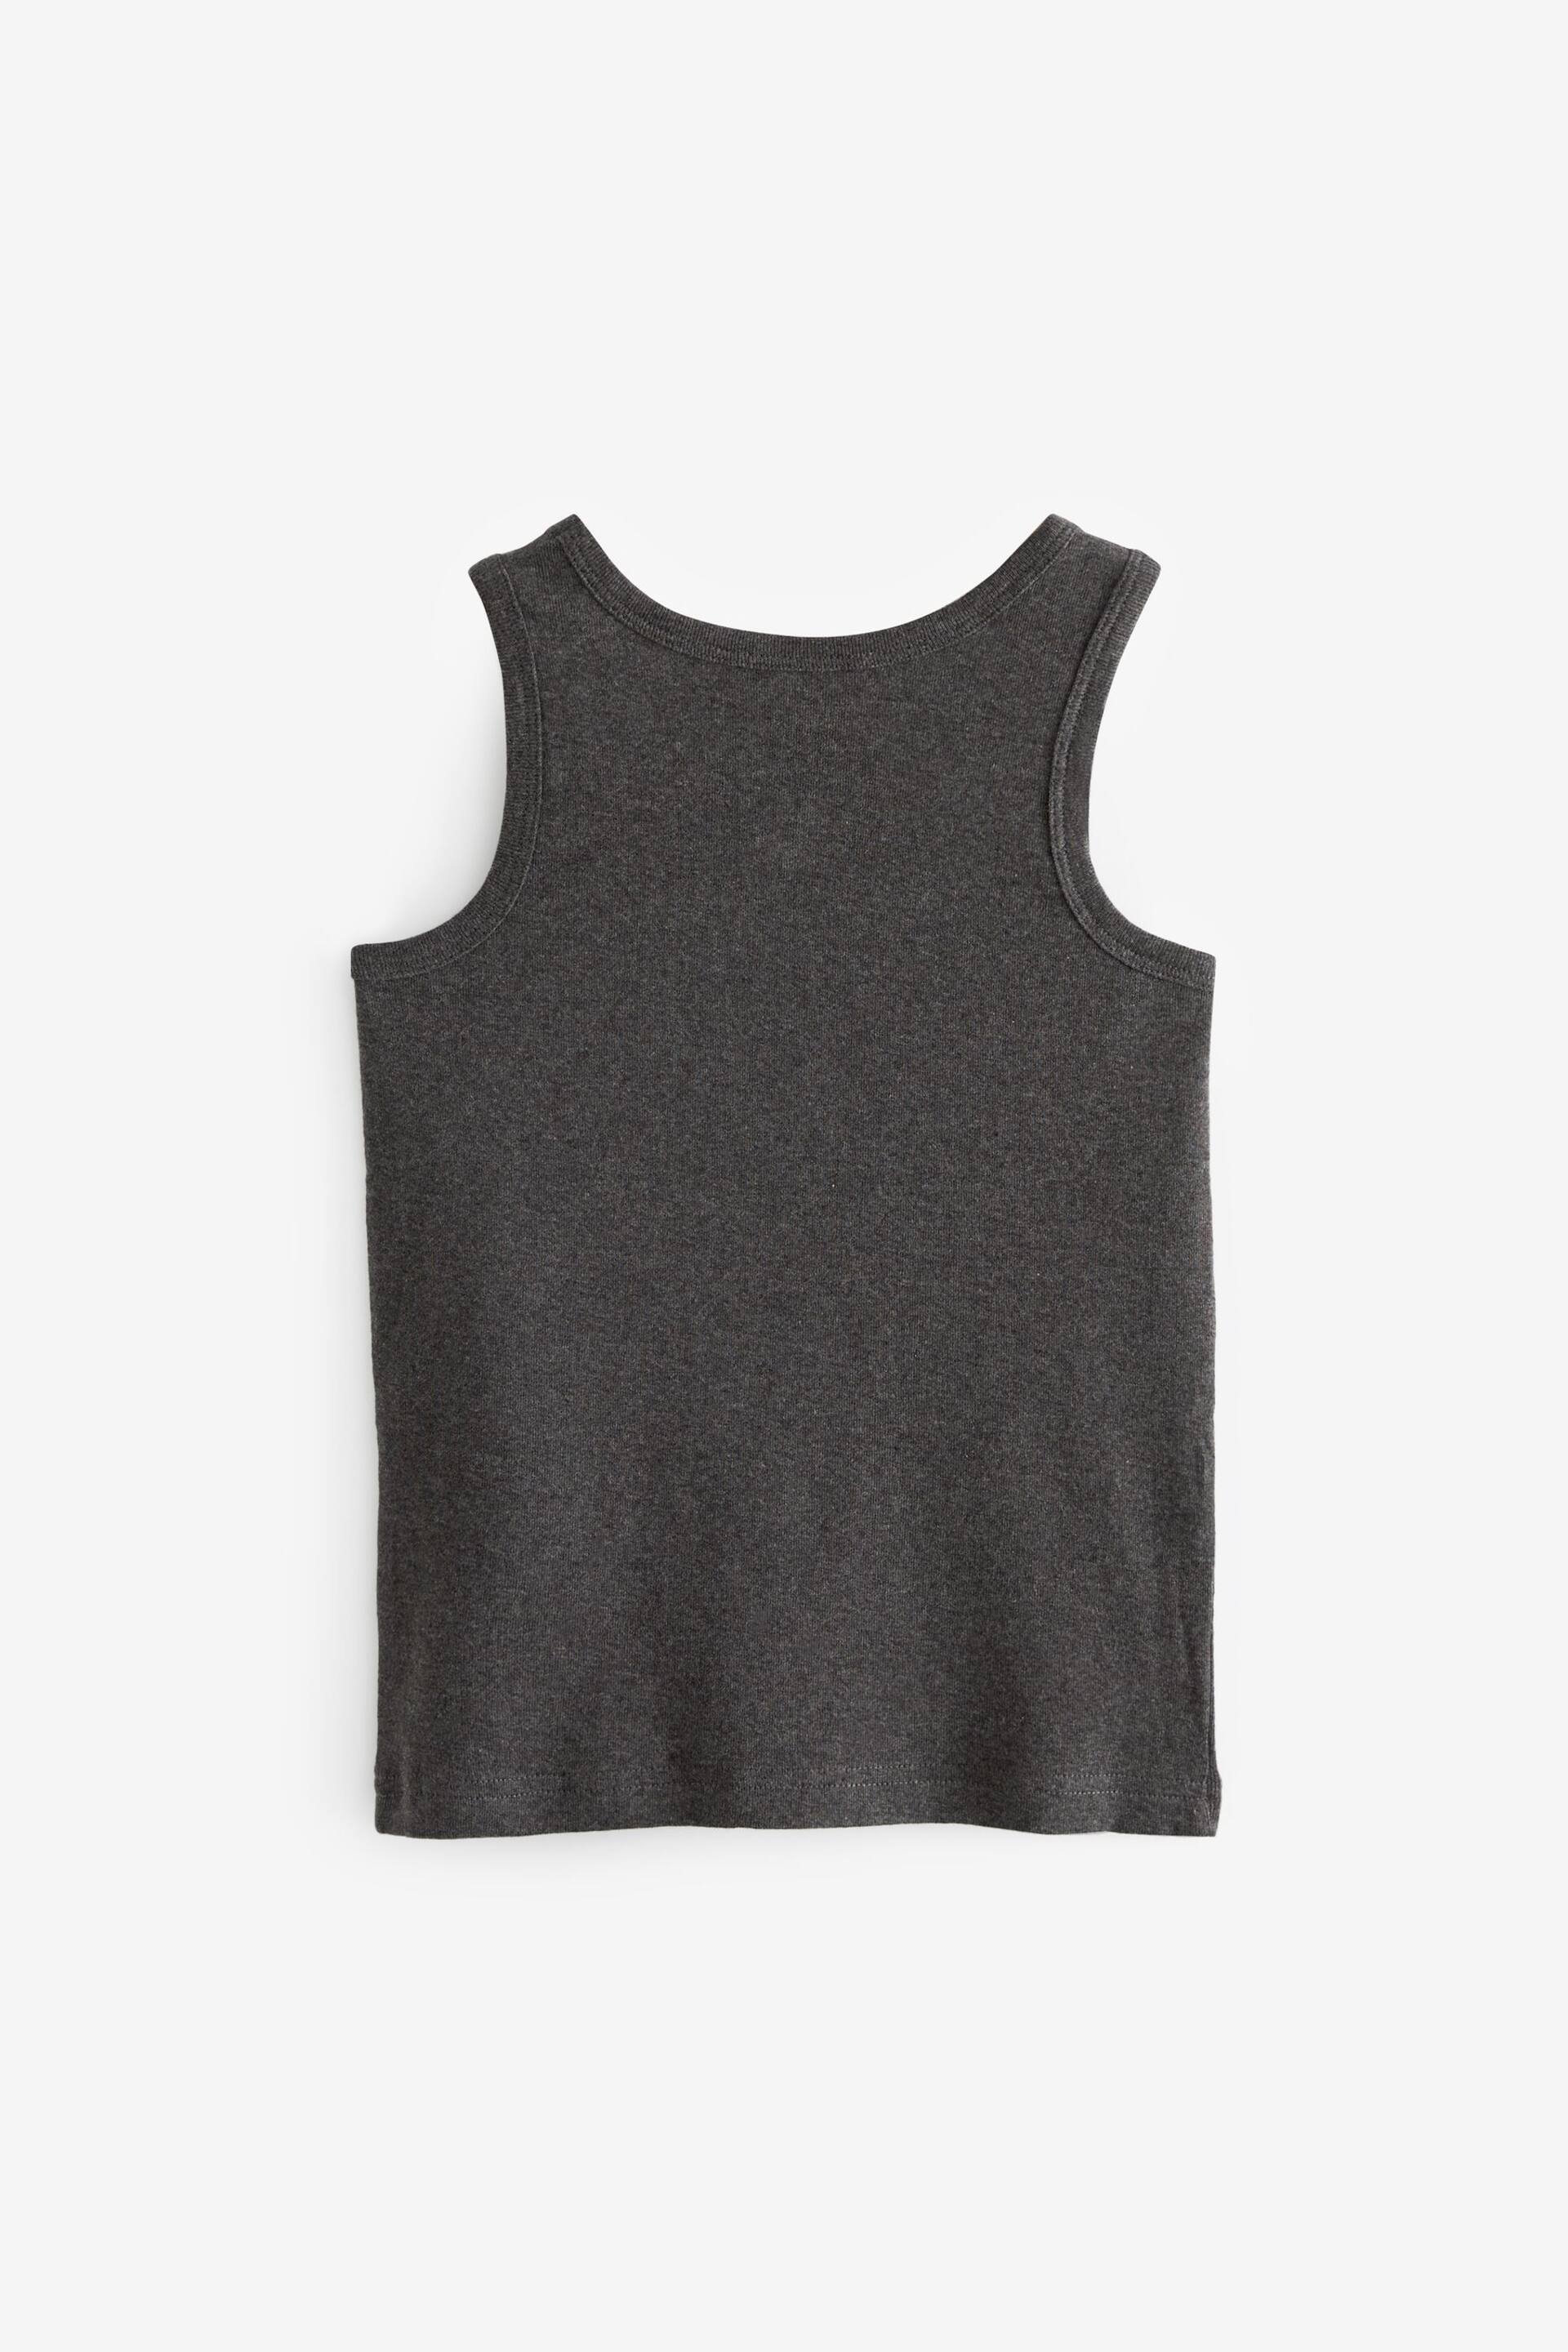 Grey Organic Cotton Vests 5 Pack (1.5-16yrs) - Image 5 of 8